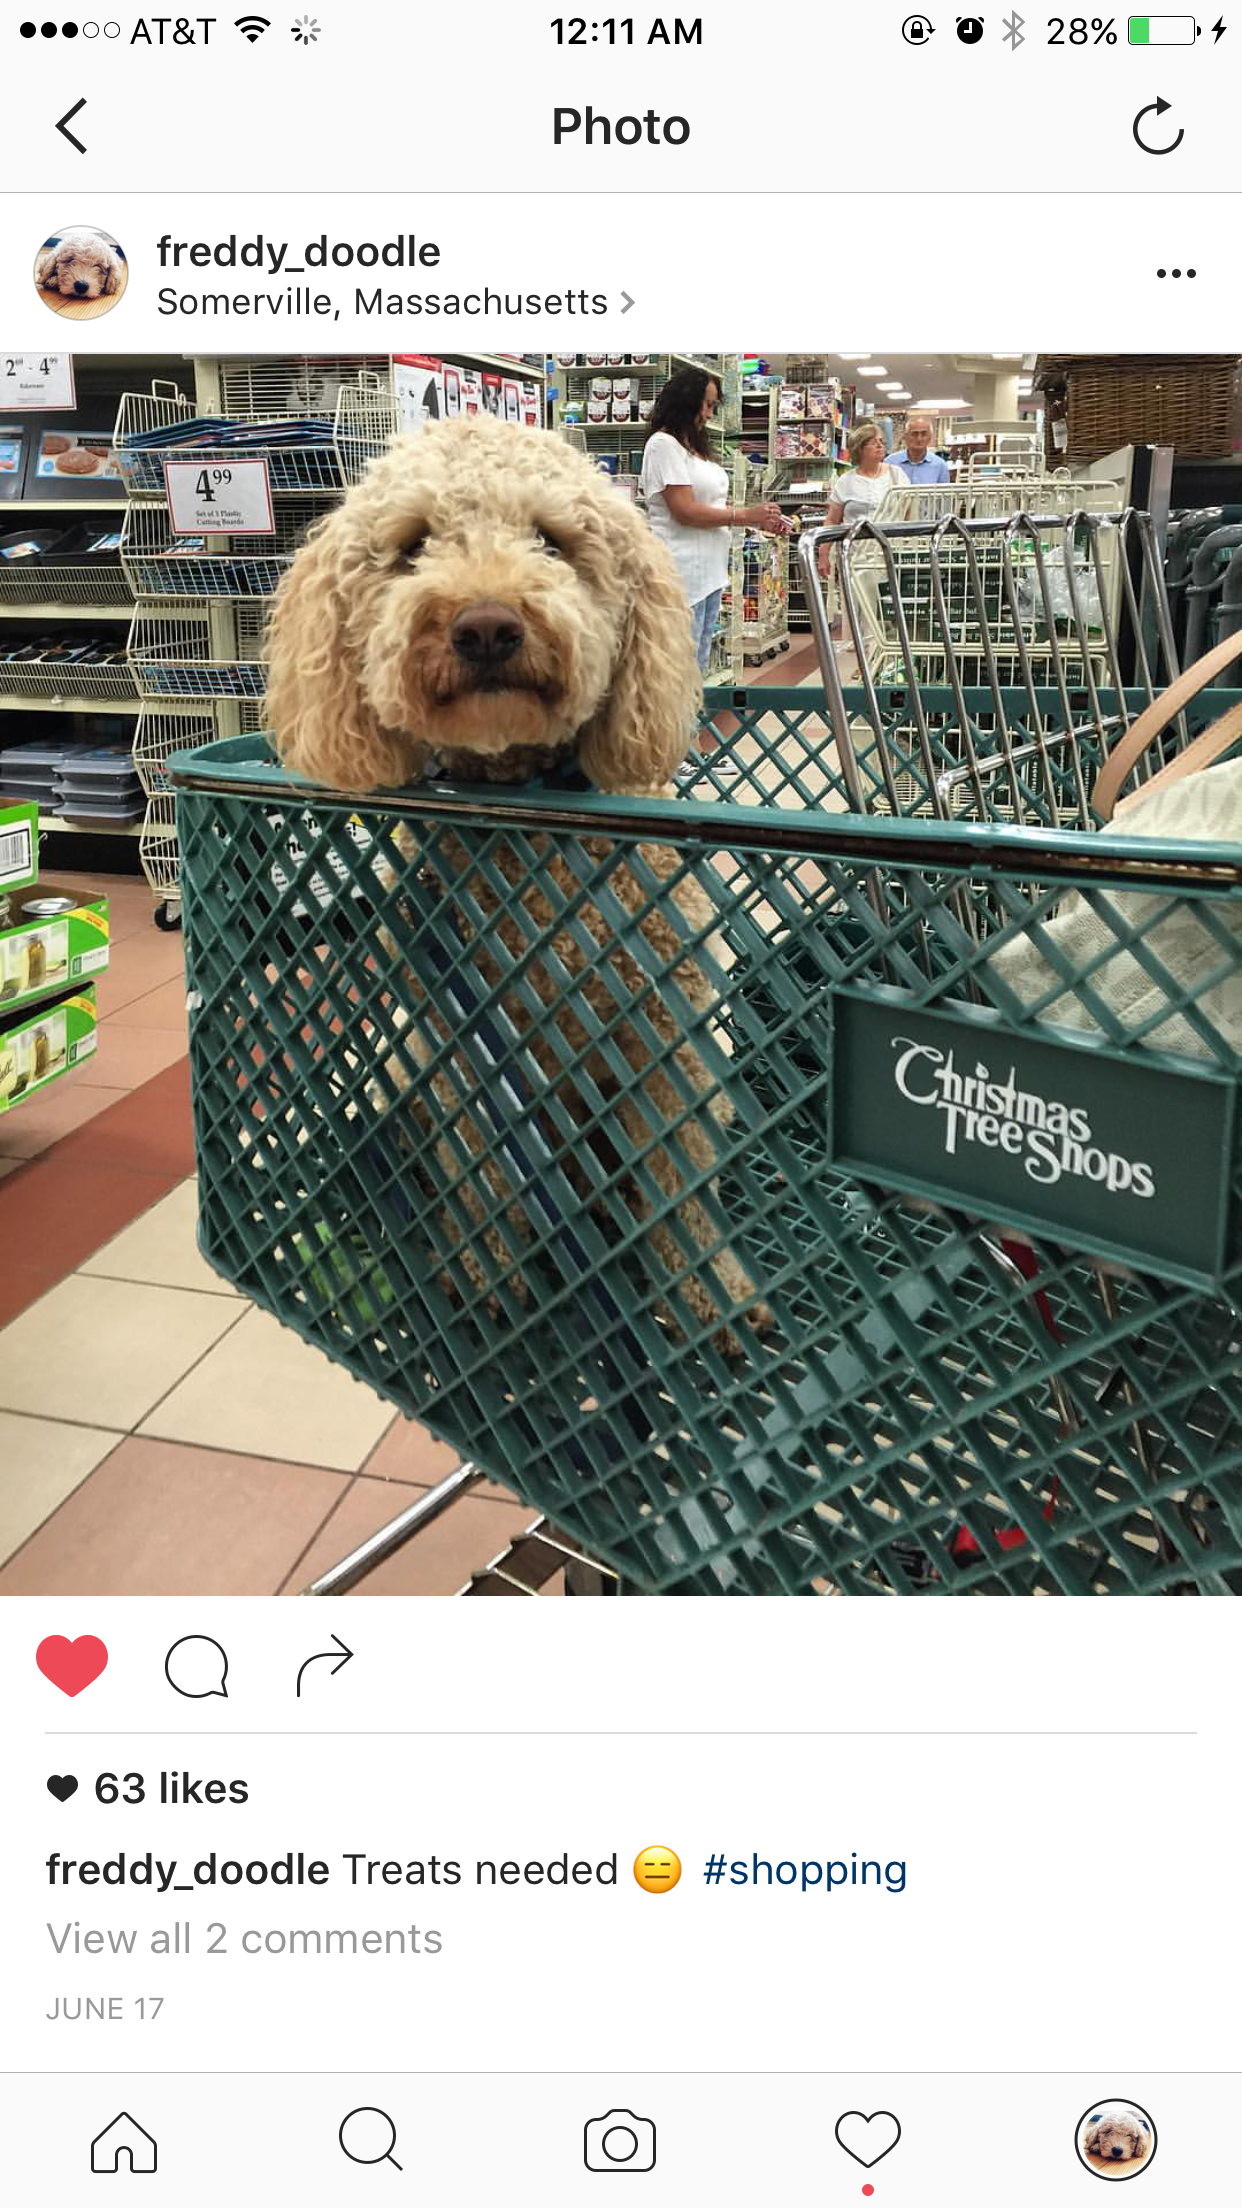 You can bring your dog shopping with you to these stores – You Bet Your